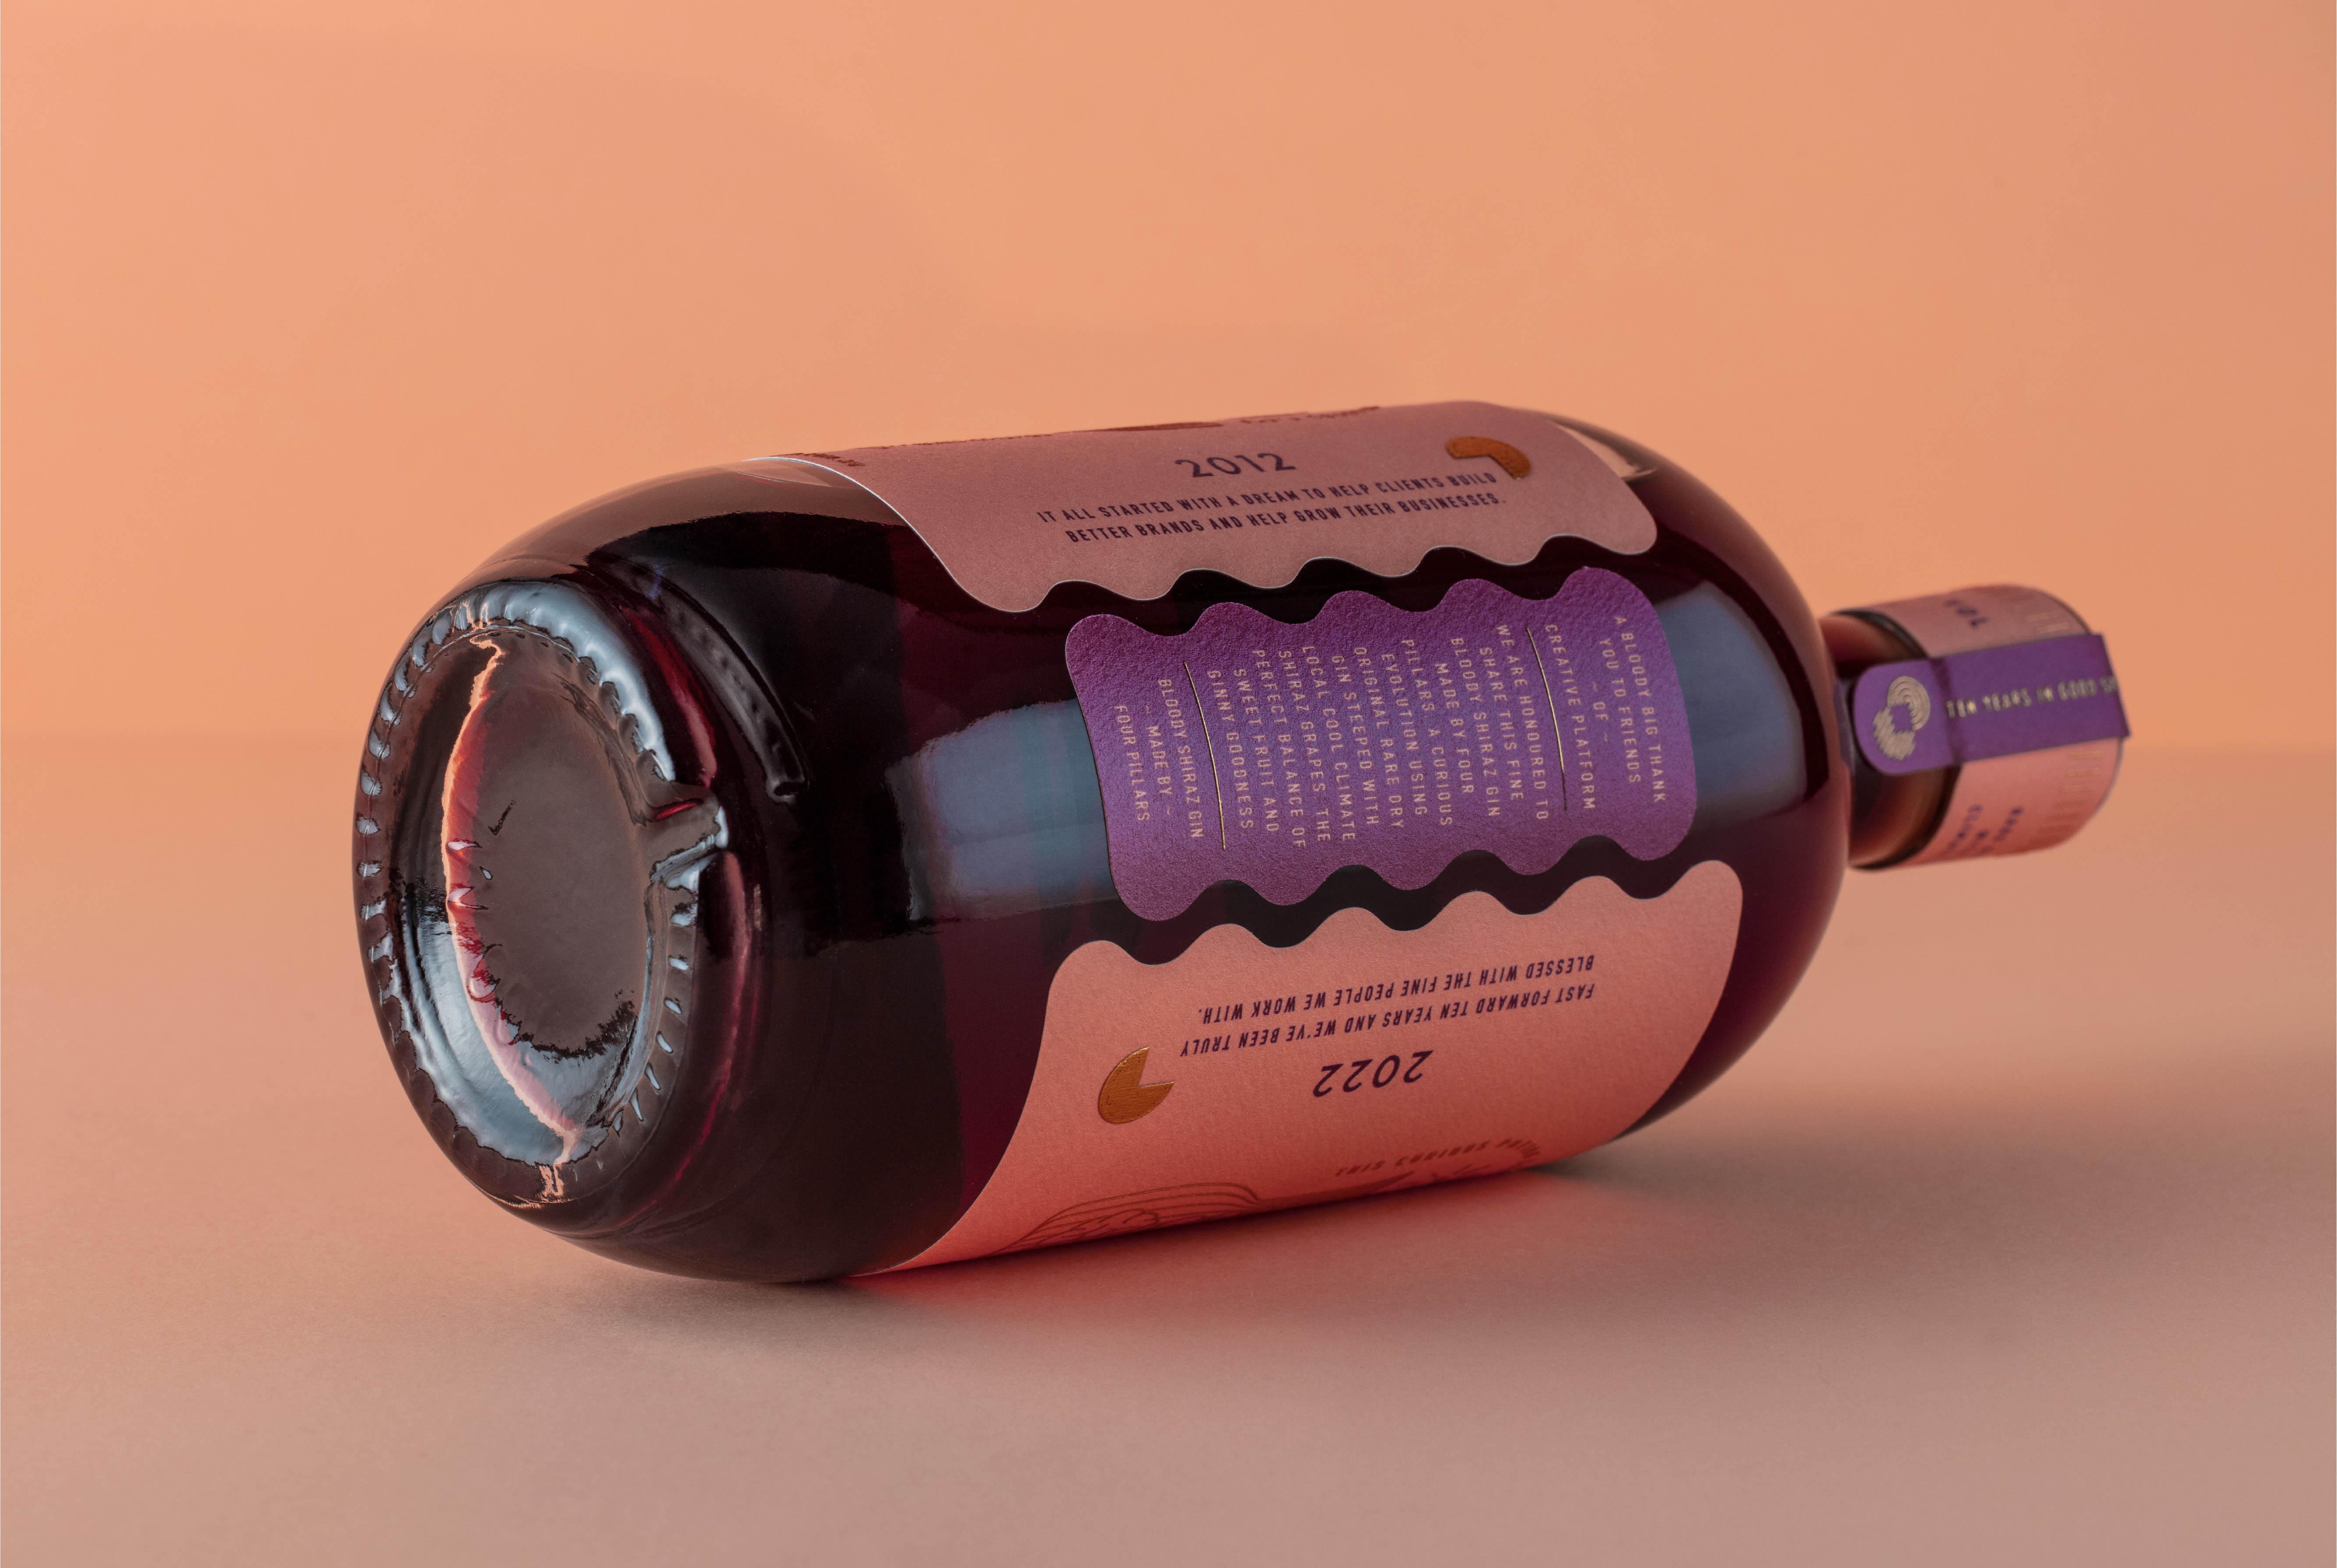 Curious Potion Packaging Design